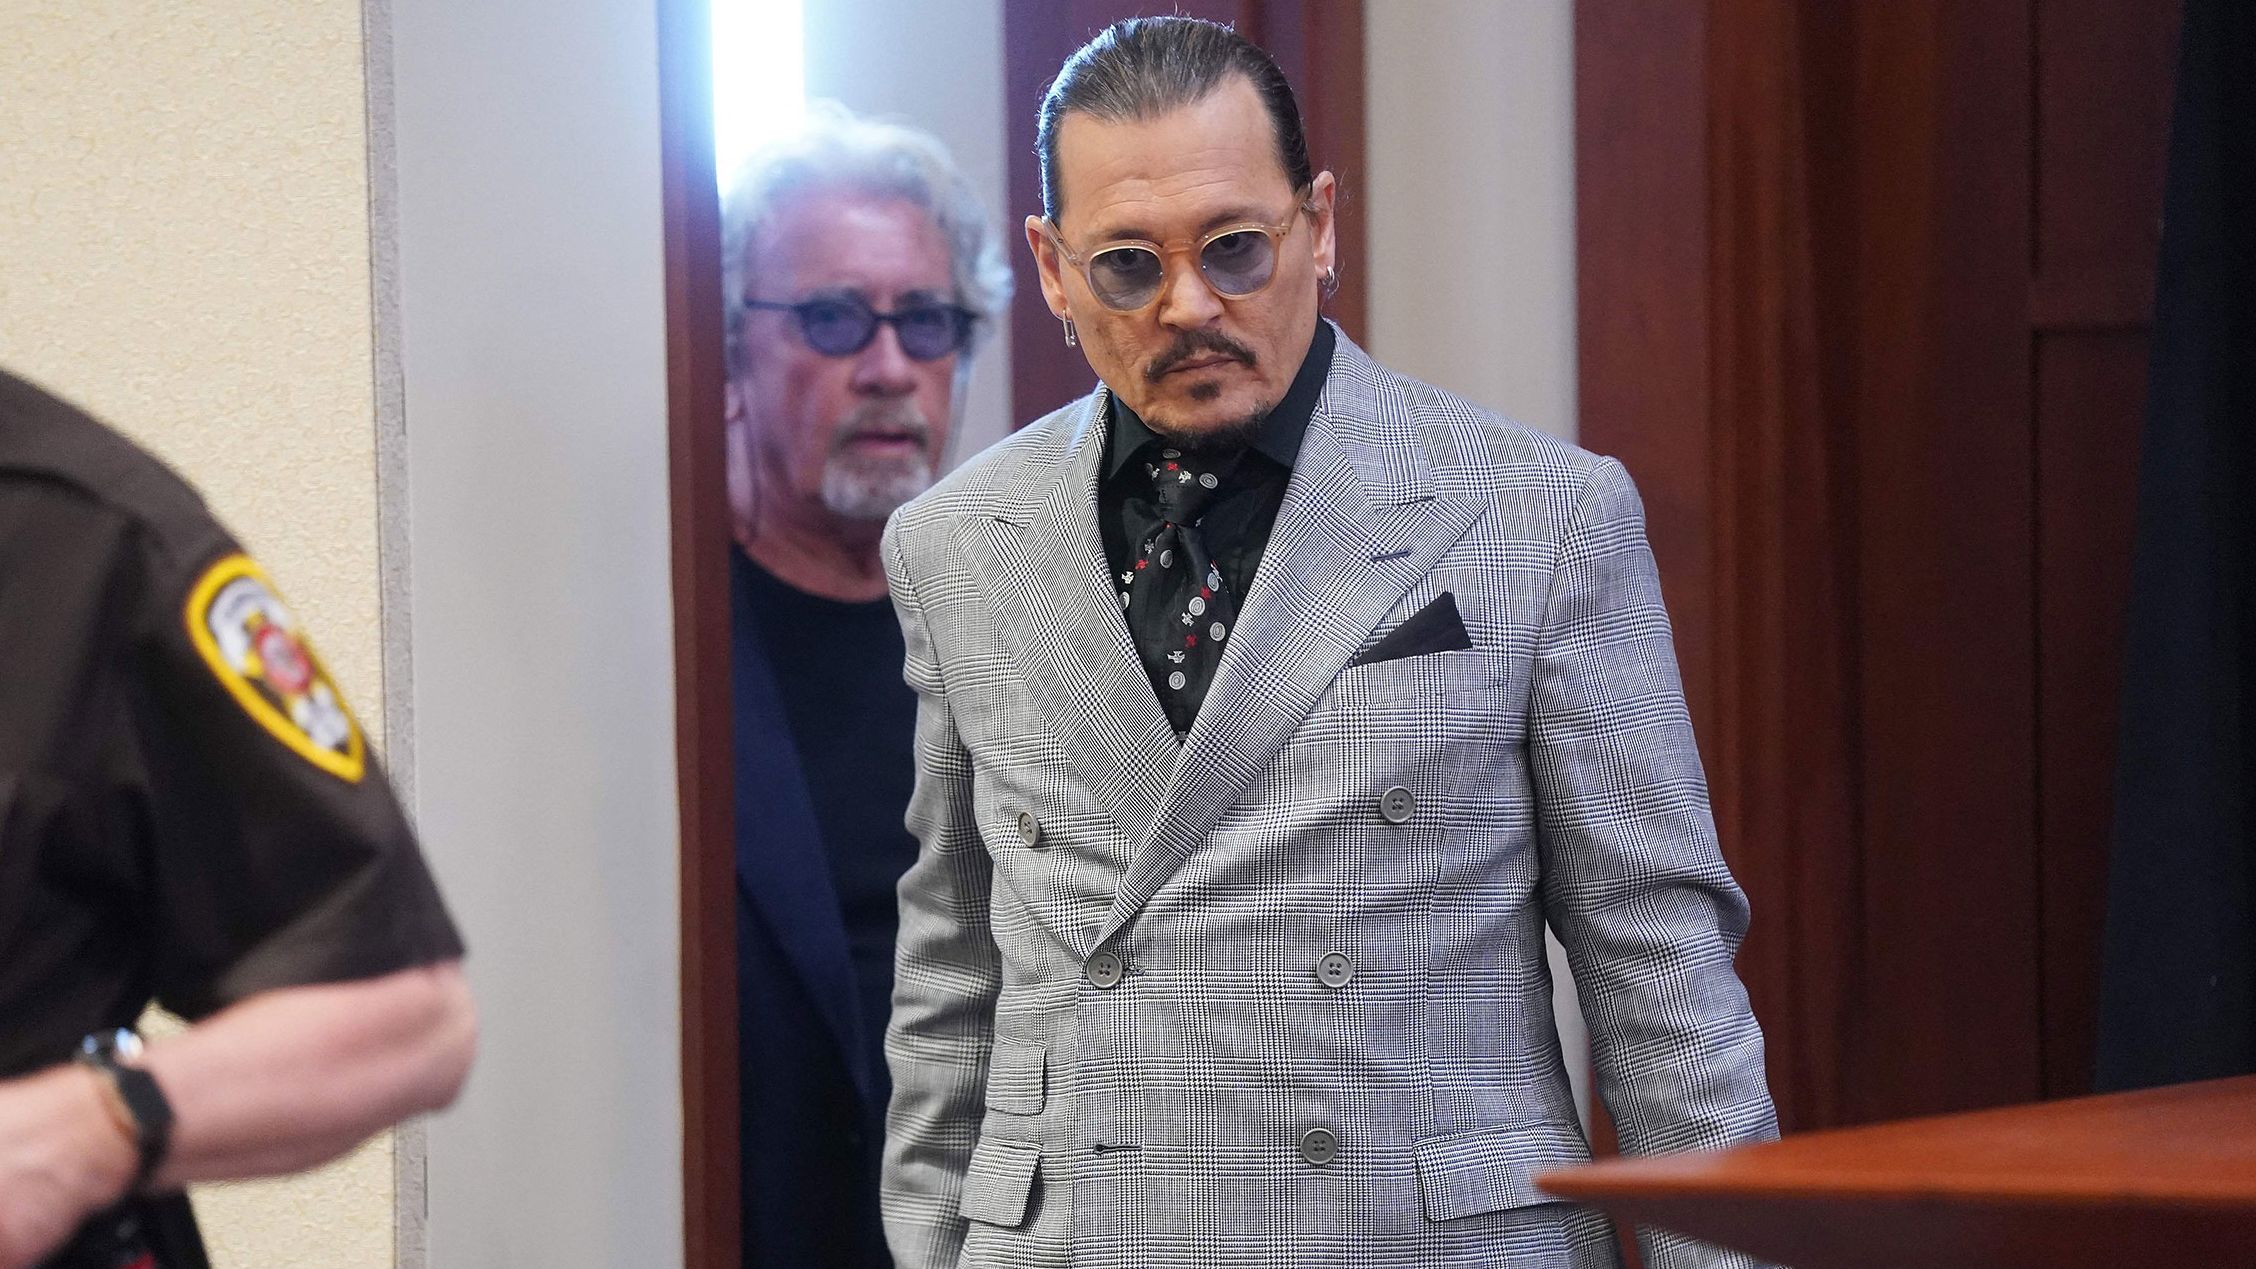 Attorneys for Johnny Depp, seen here at the Fairfax County Circuit Court in Fairfax, Virginia, on May 19, 2022, have fired back against Amber Heard's motions for mistrial. 